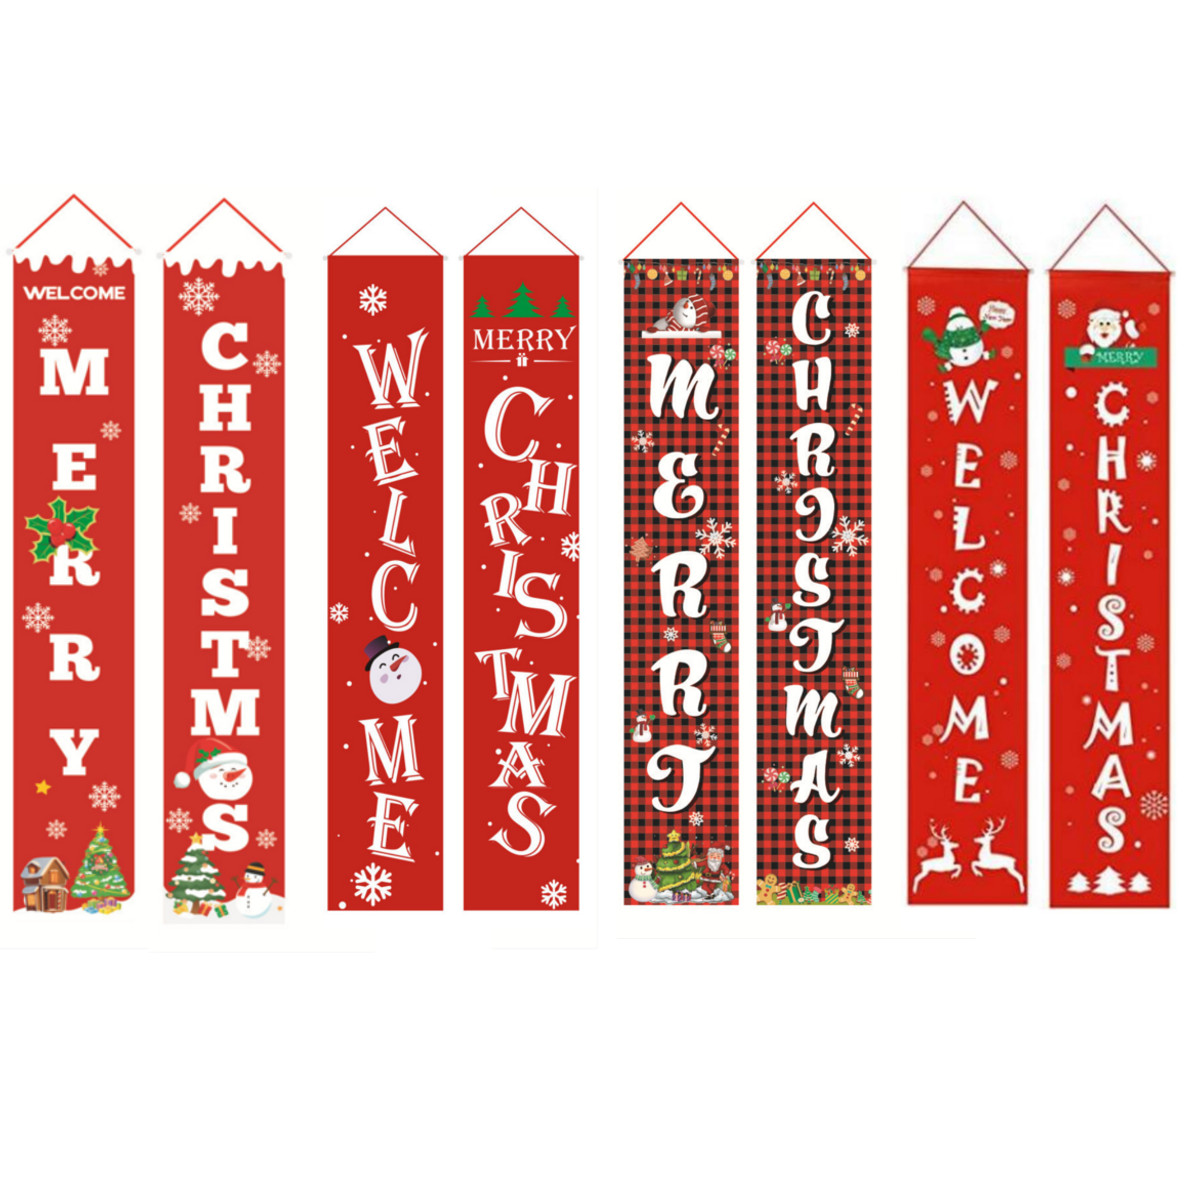 

Merry Christmas Porch Banner Christmas Outdoor Decorations for Home Hanging Pendant Ornament